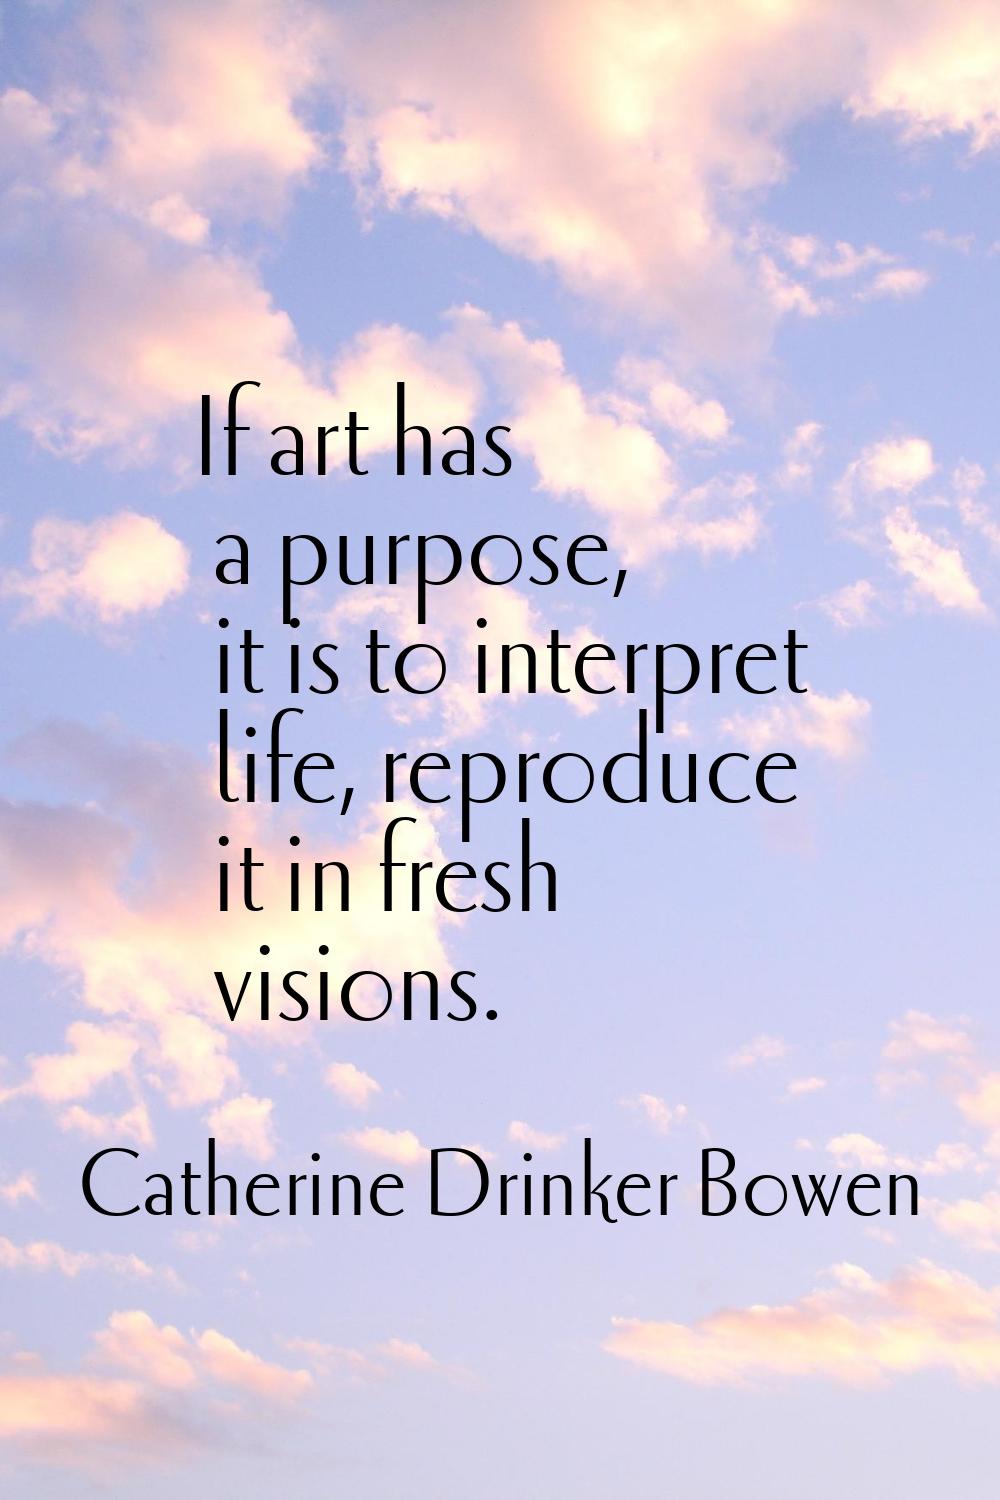 If art has a purpose, it is to interpret life, reproduce it in fresh visions.